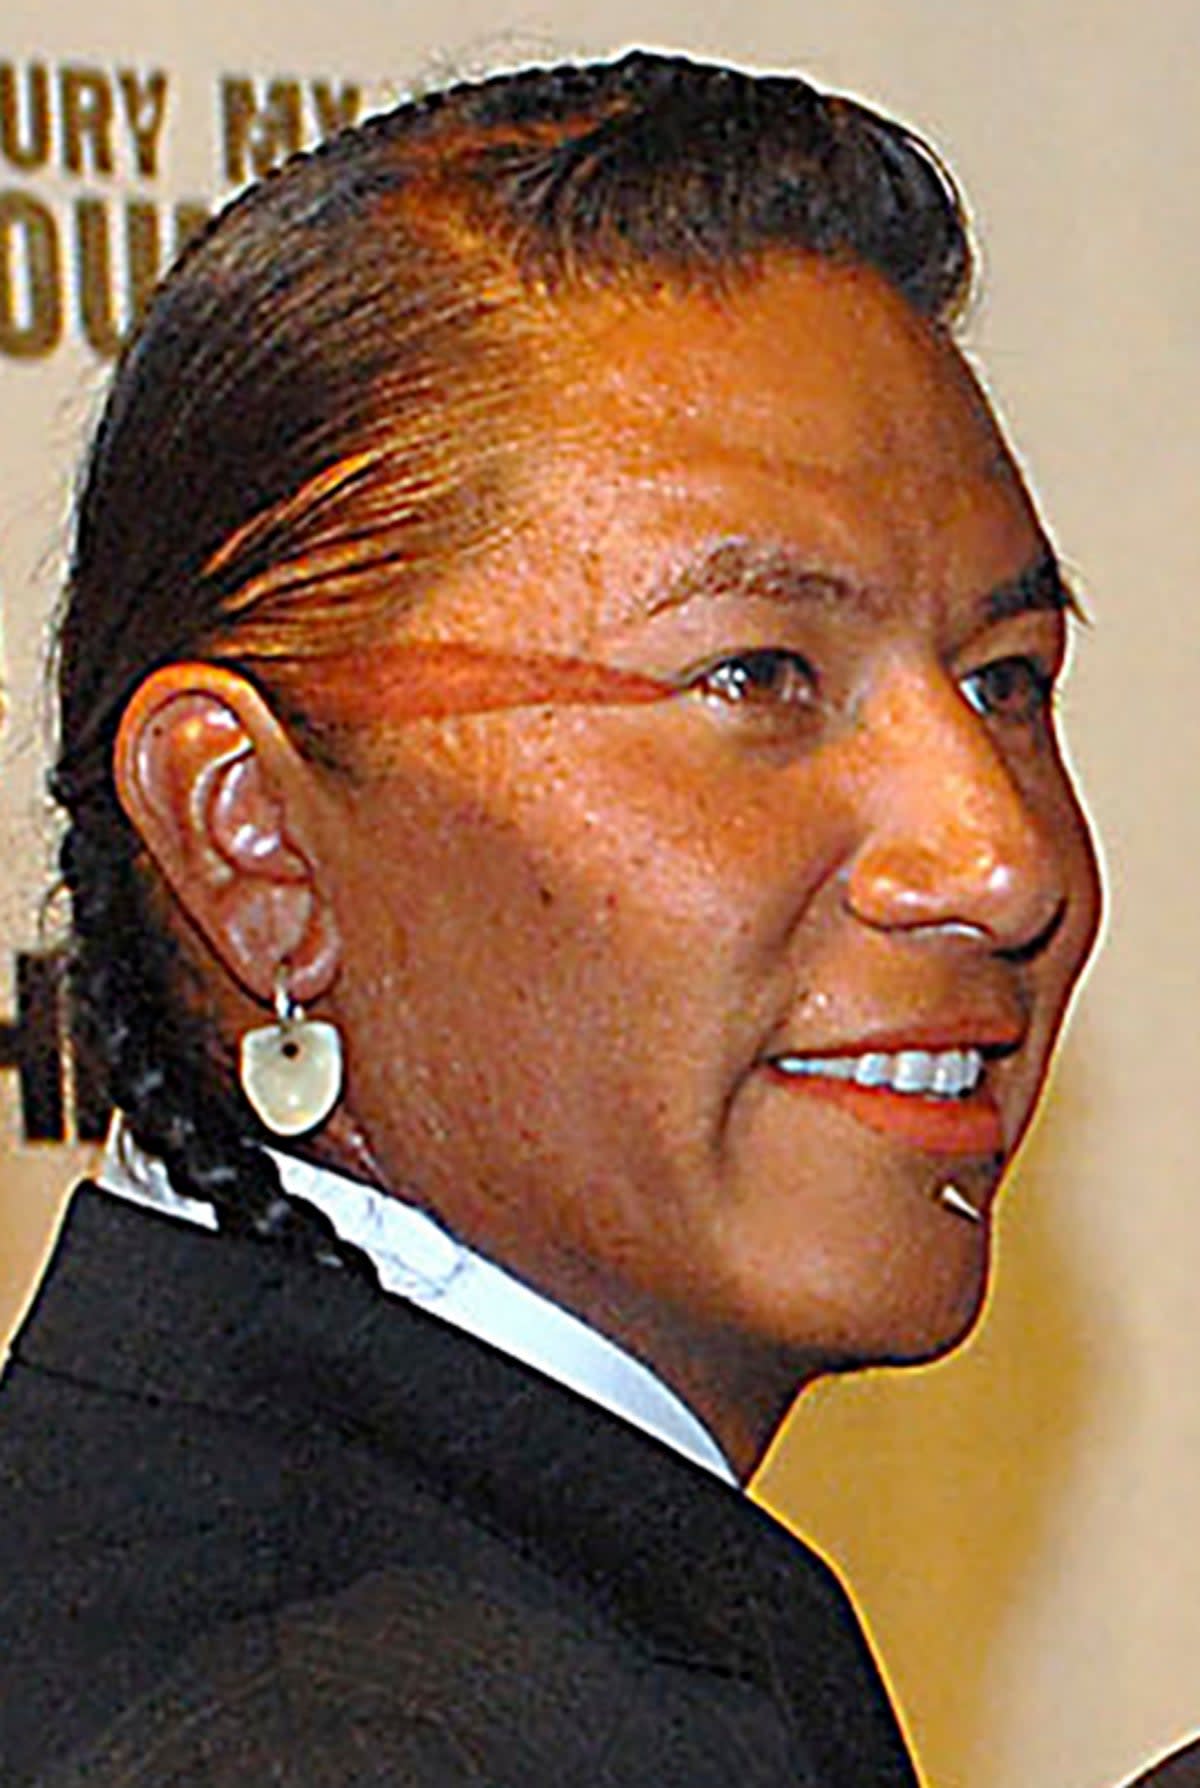 Nathan Chasing Horse attends the South Dakota premiere of the HBO film “Bury My Heart at Wounded Knee” at the Rushmore Plaza Civic Center on May 17, 2007, in Rapid City, South Dakota (AP)